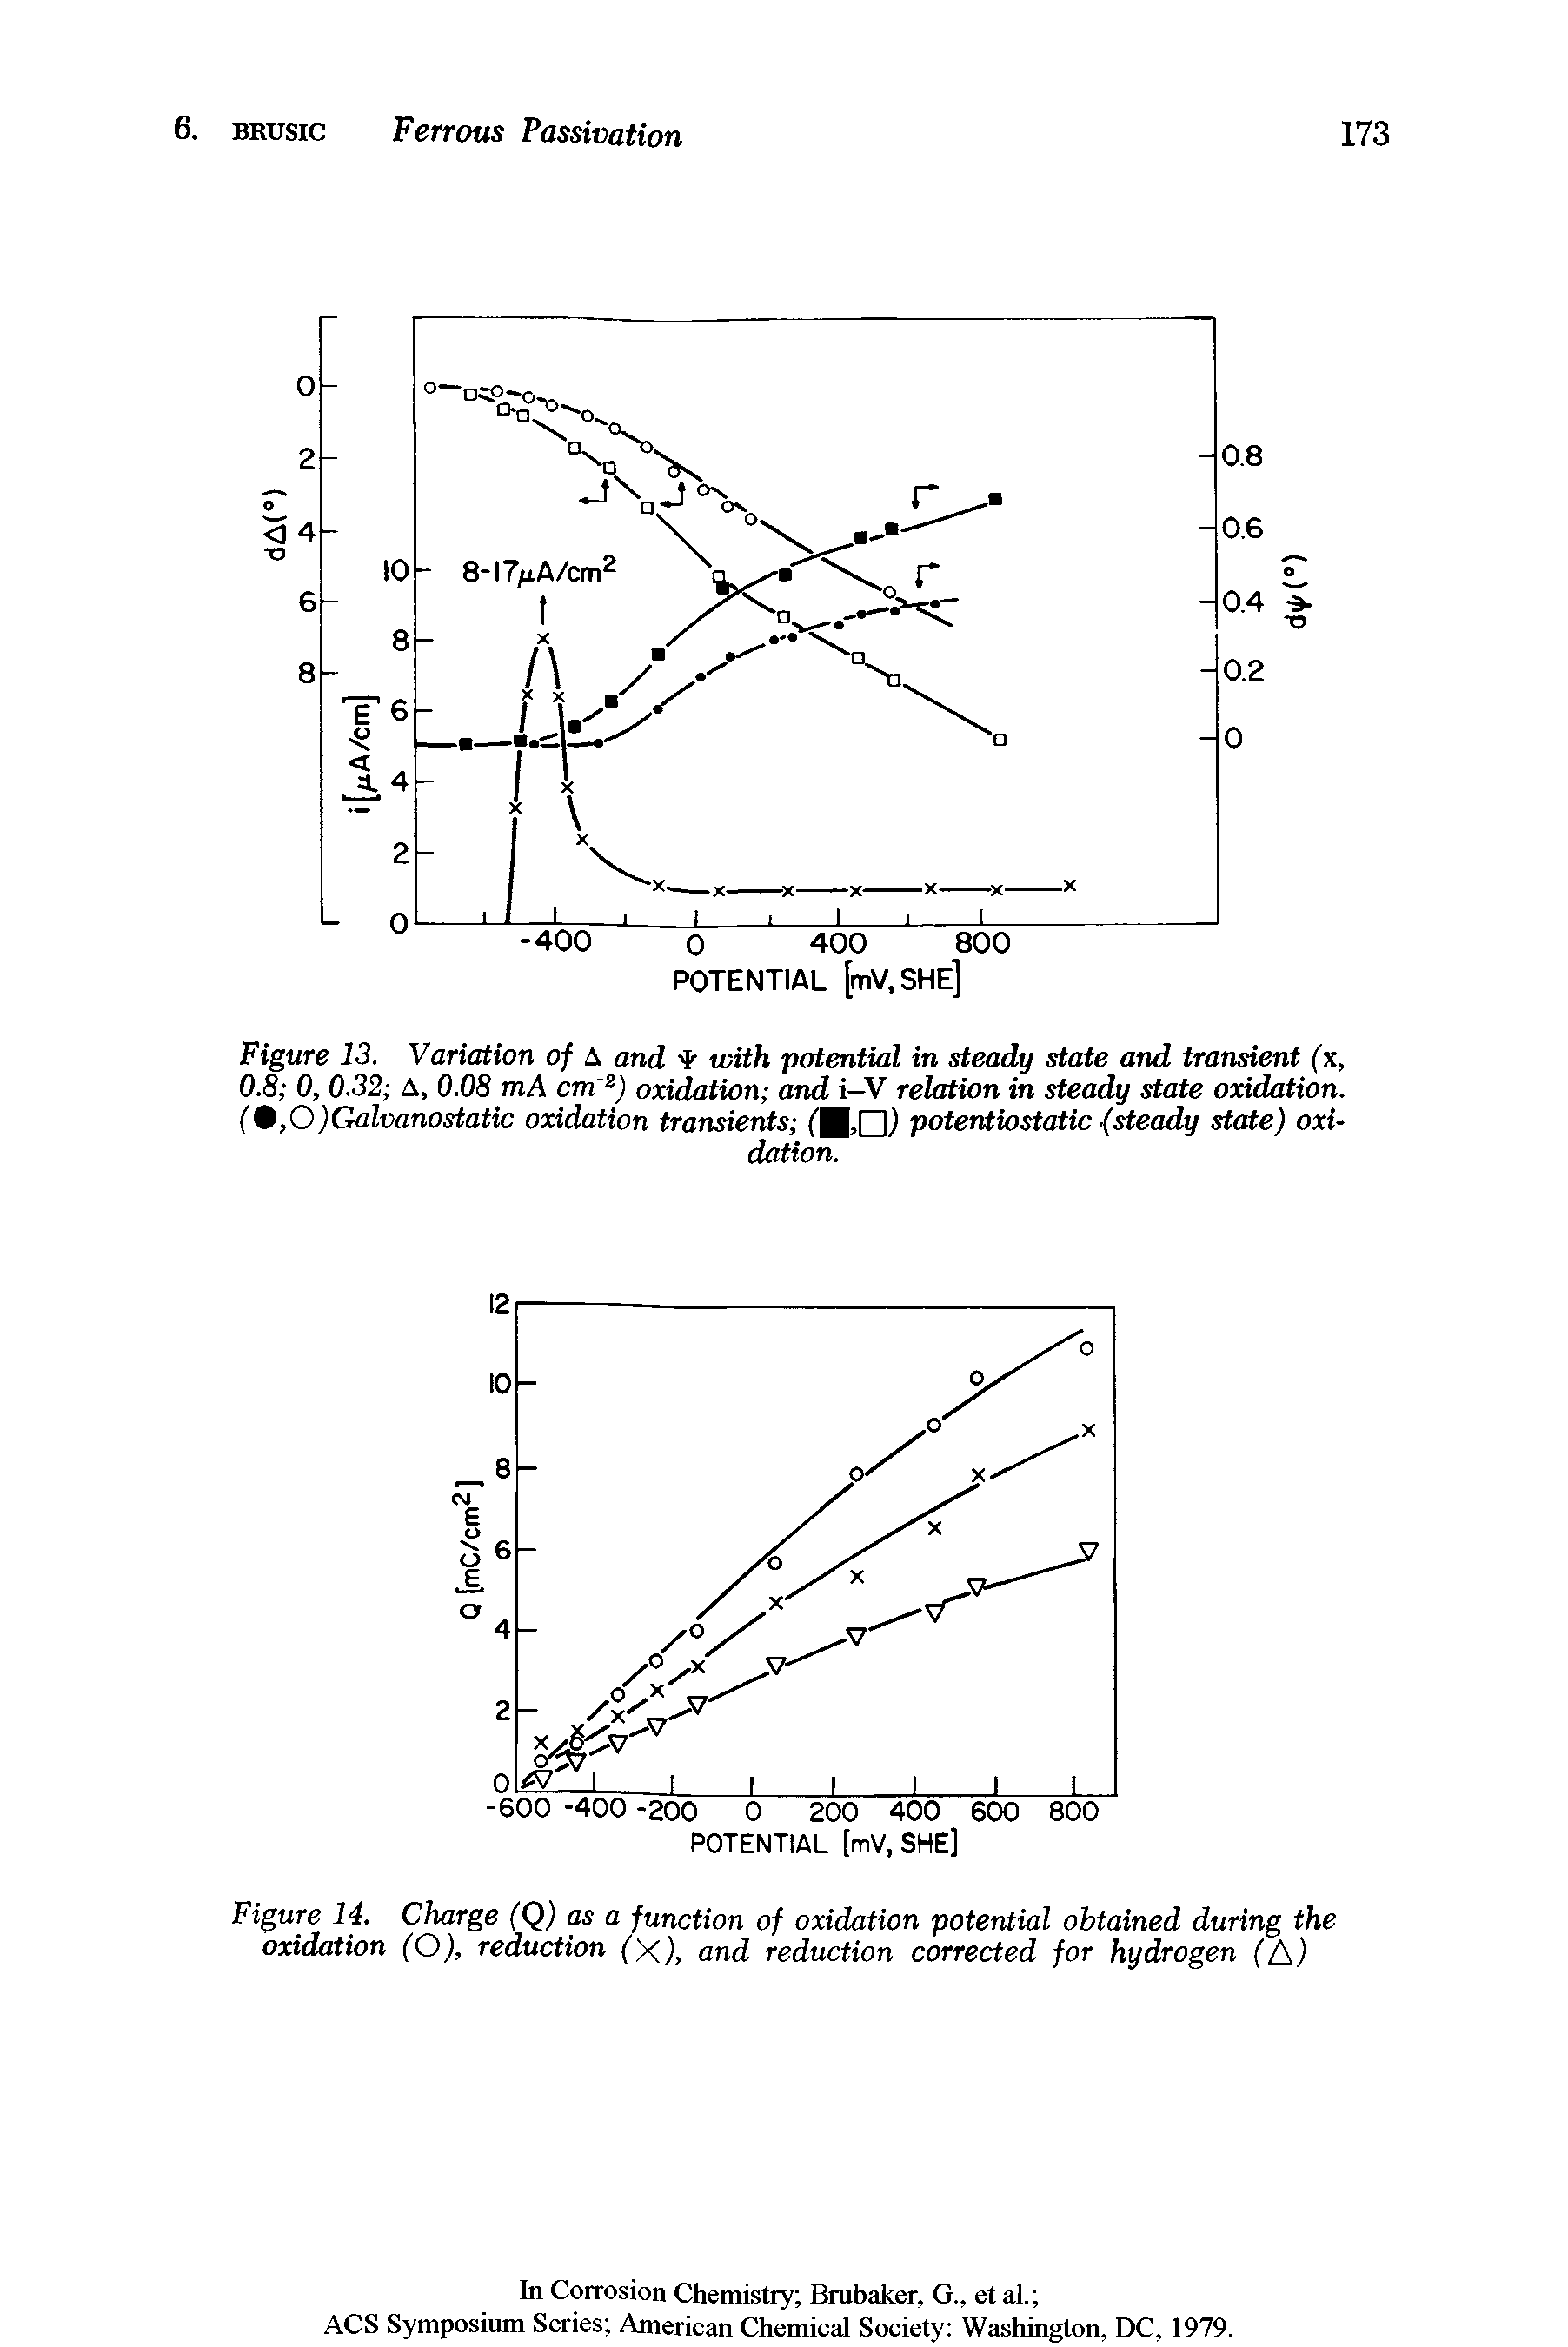 Figure 13. Variation of A and with potential in steady state and transient (x, 0.8 0, 0.32 A, 0.08 mA crn ) oxidation and i—V relation in steady state oxidation. (9,0)Galvanostatic oxidation transients potentiostatic steady state) oxi-...